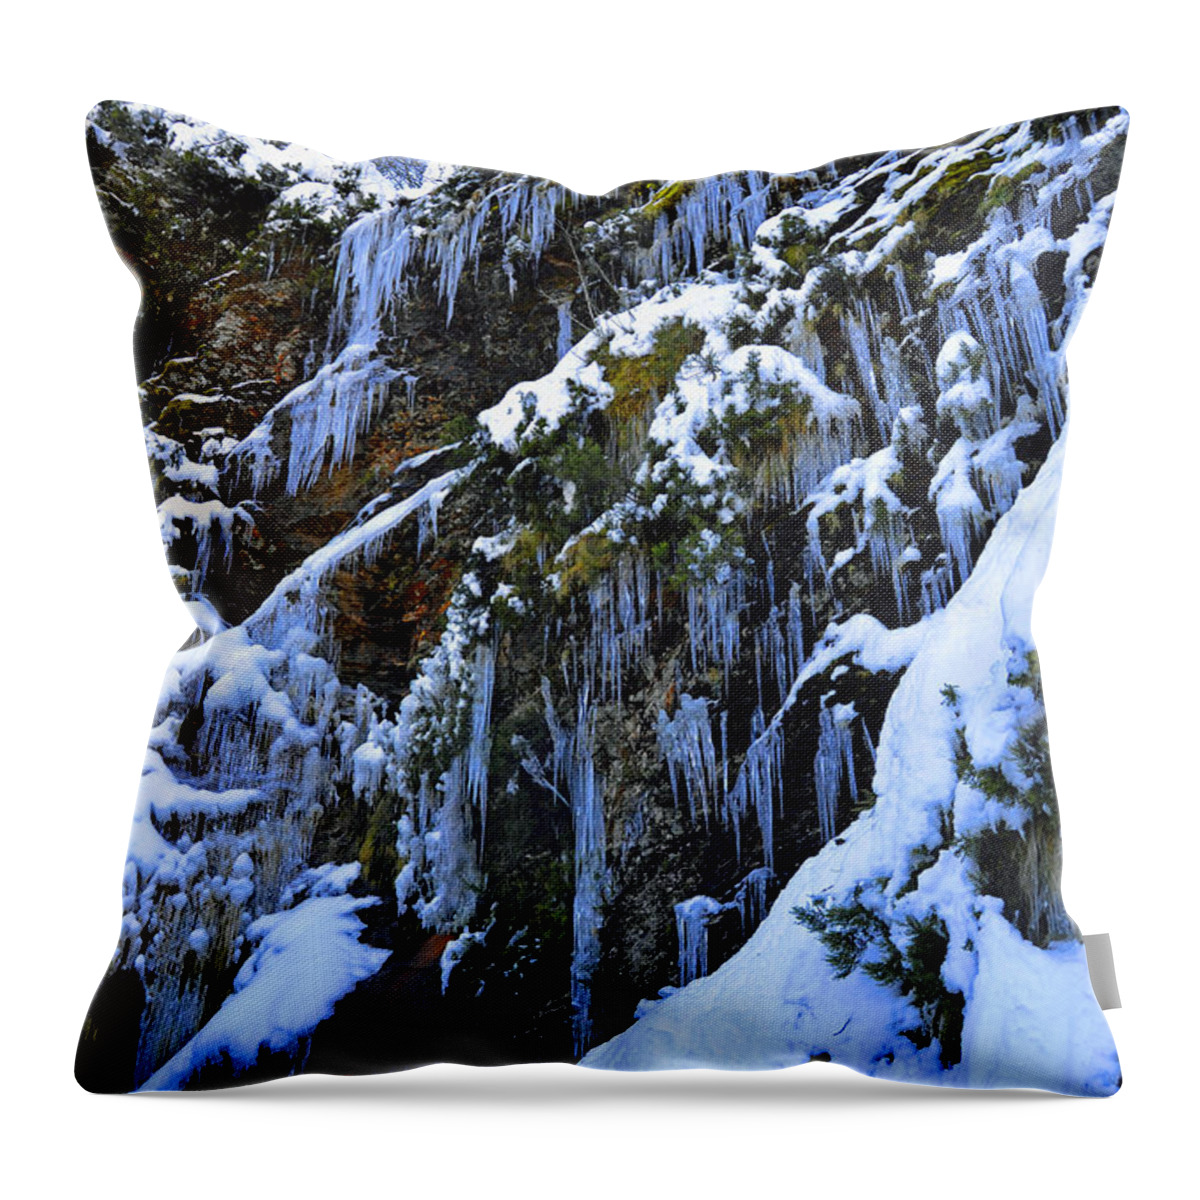 Fuente Throw Pillow featuring the photograph Fonte Do Cervo by Taly Amoedo